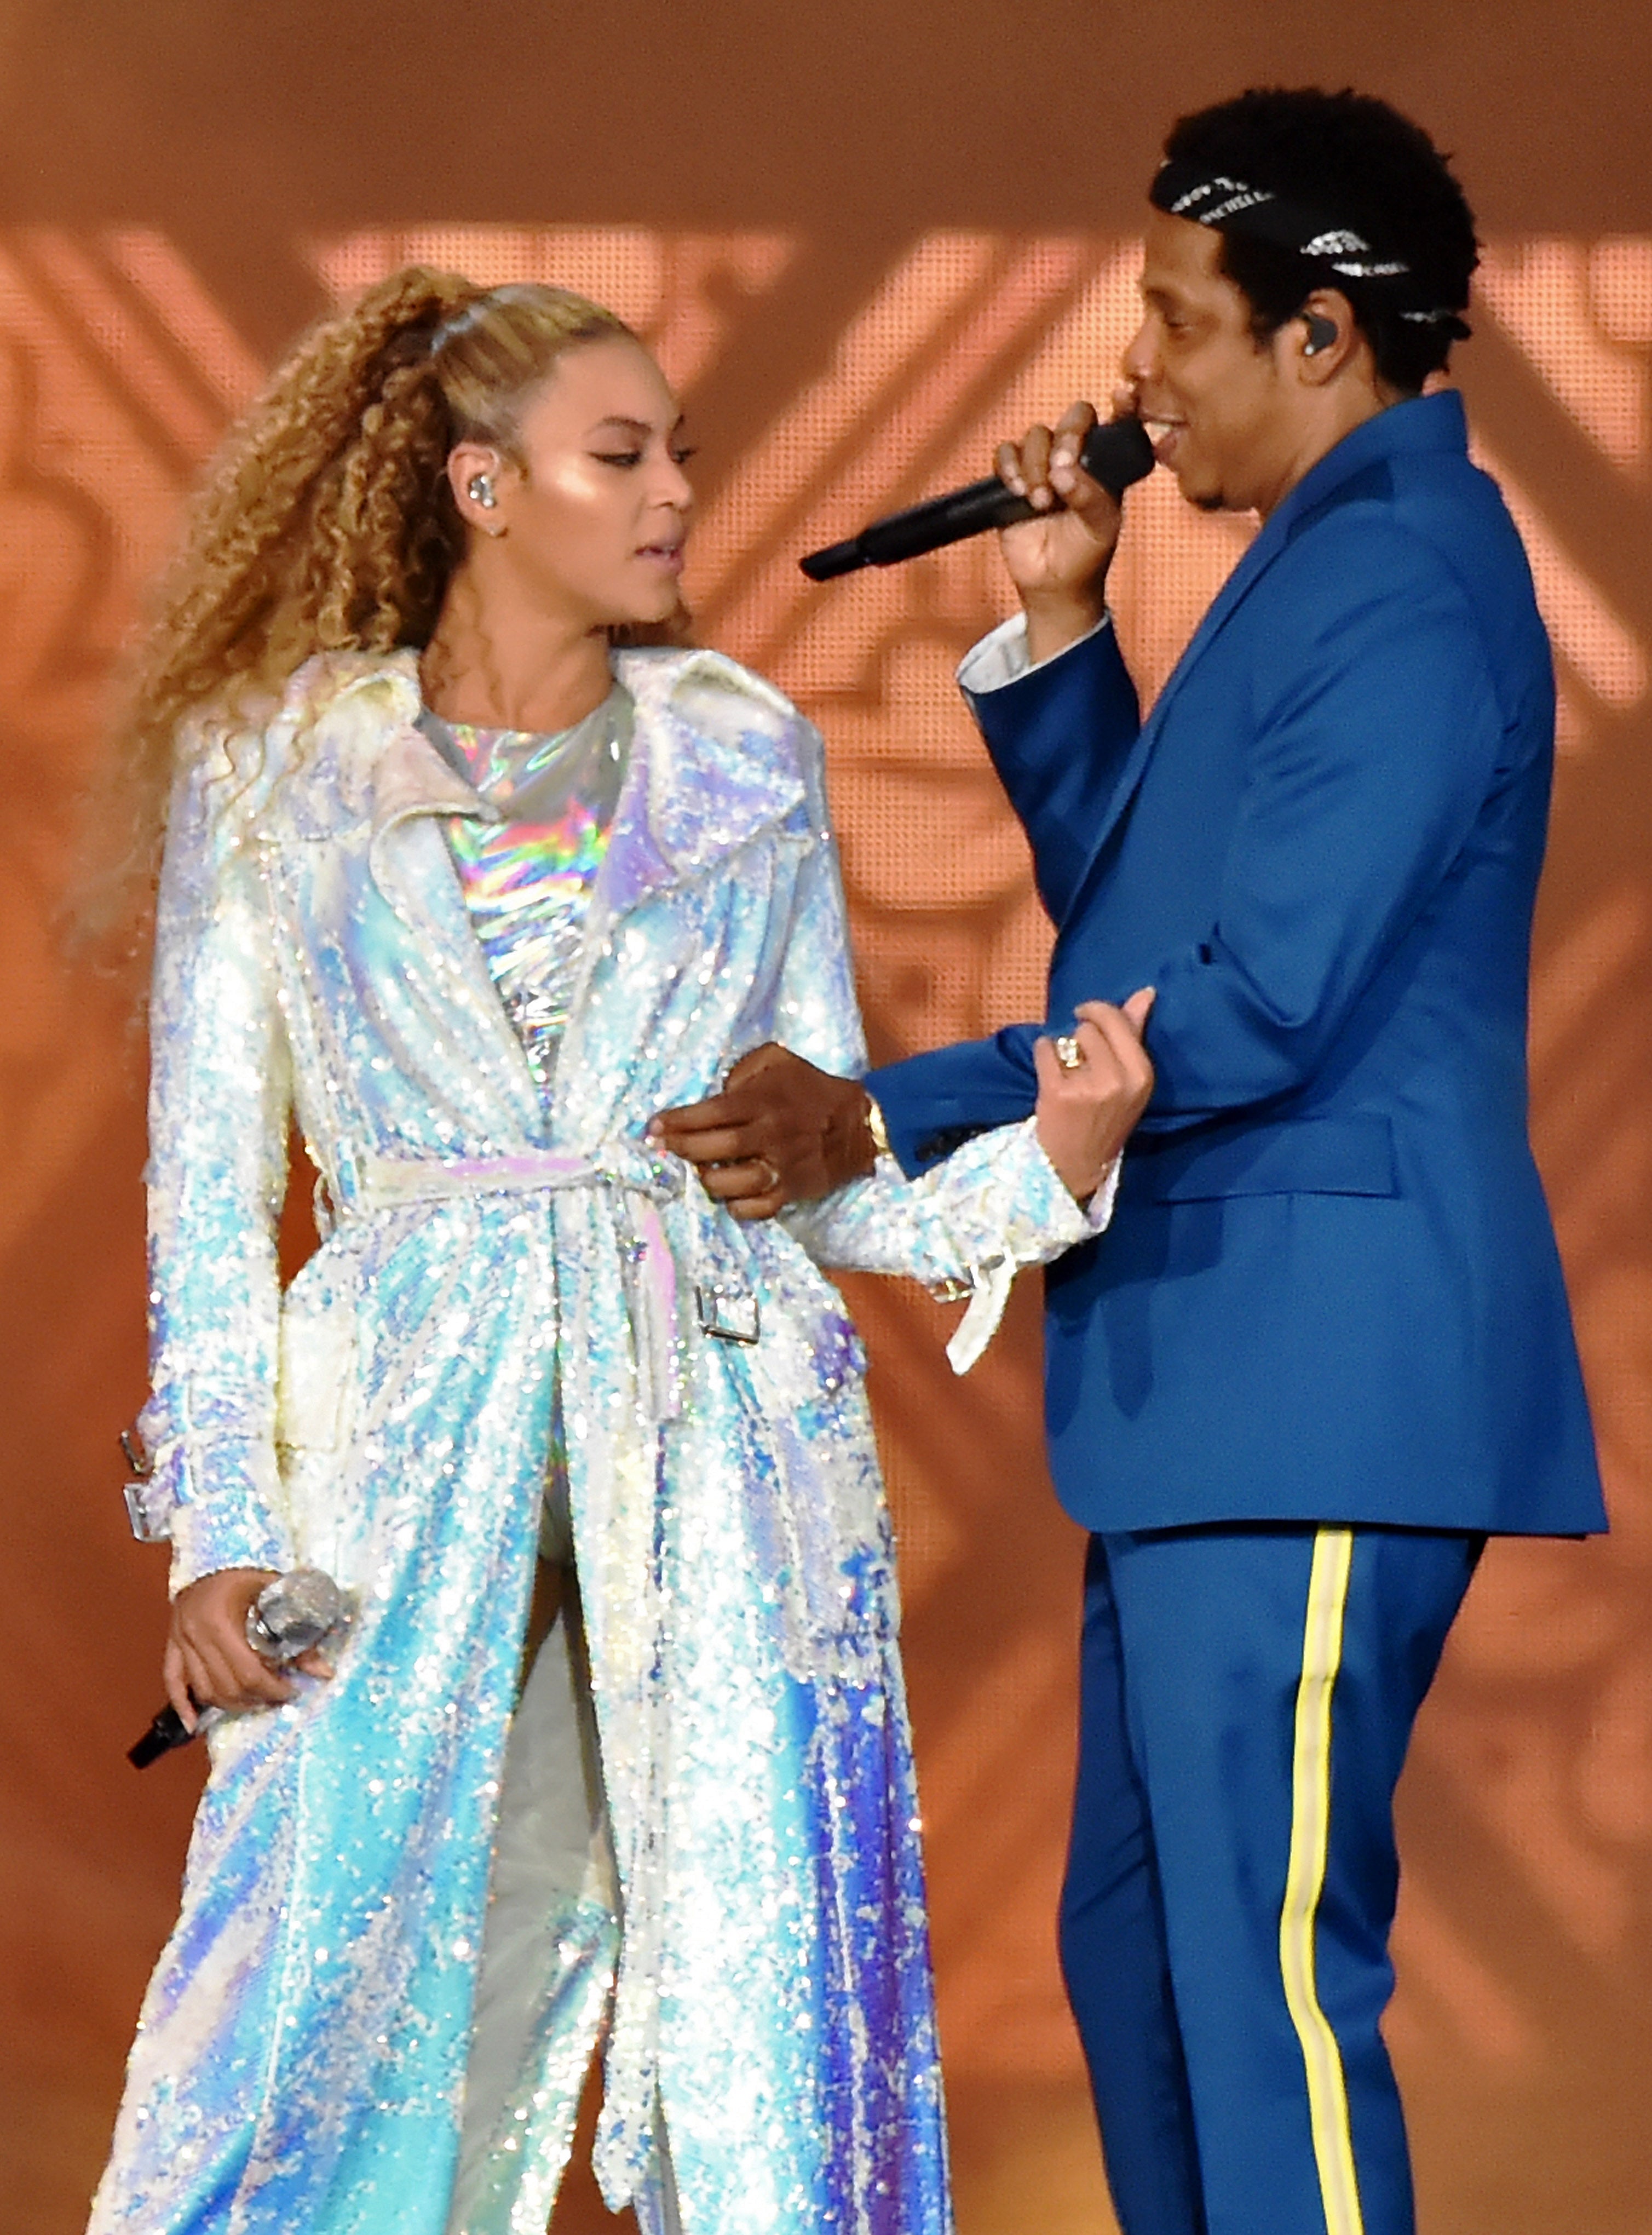 Everything Beyoncé and JAY-Z Revealed About Their Relationship Inside The Lyrics On Their New Joint Album
